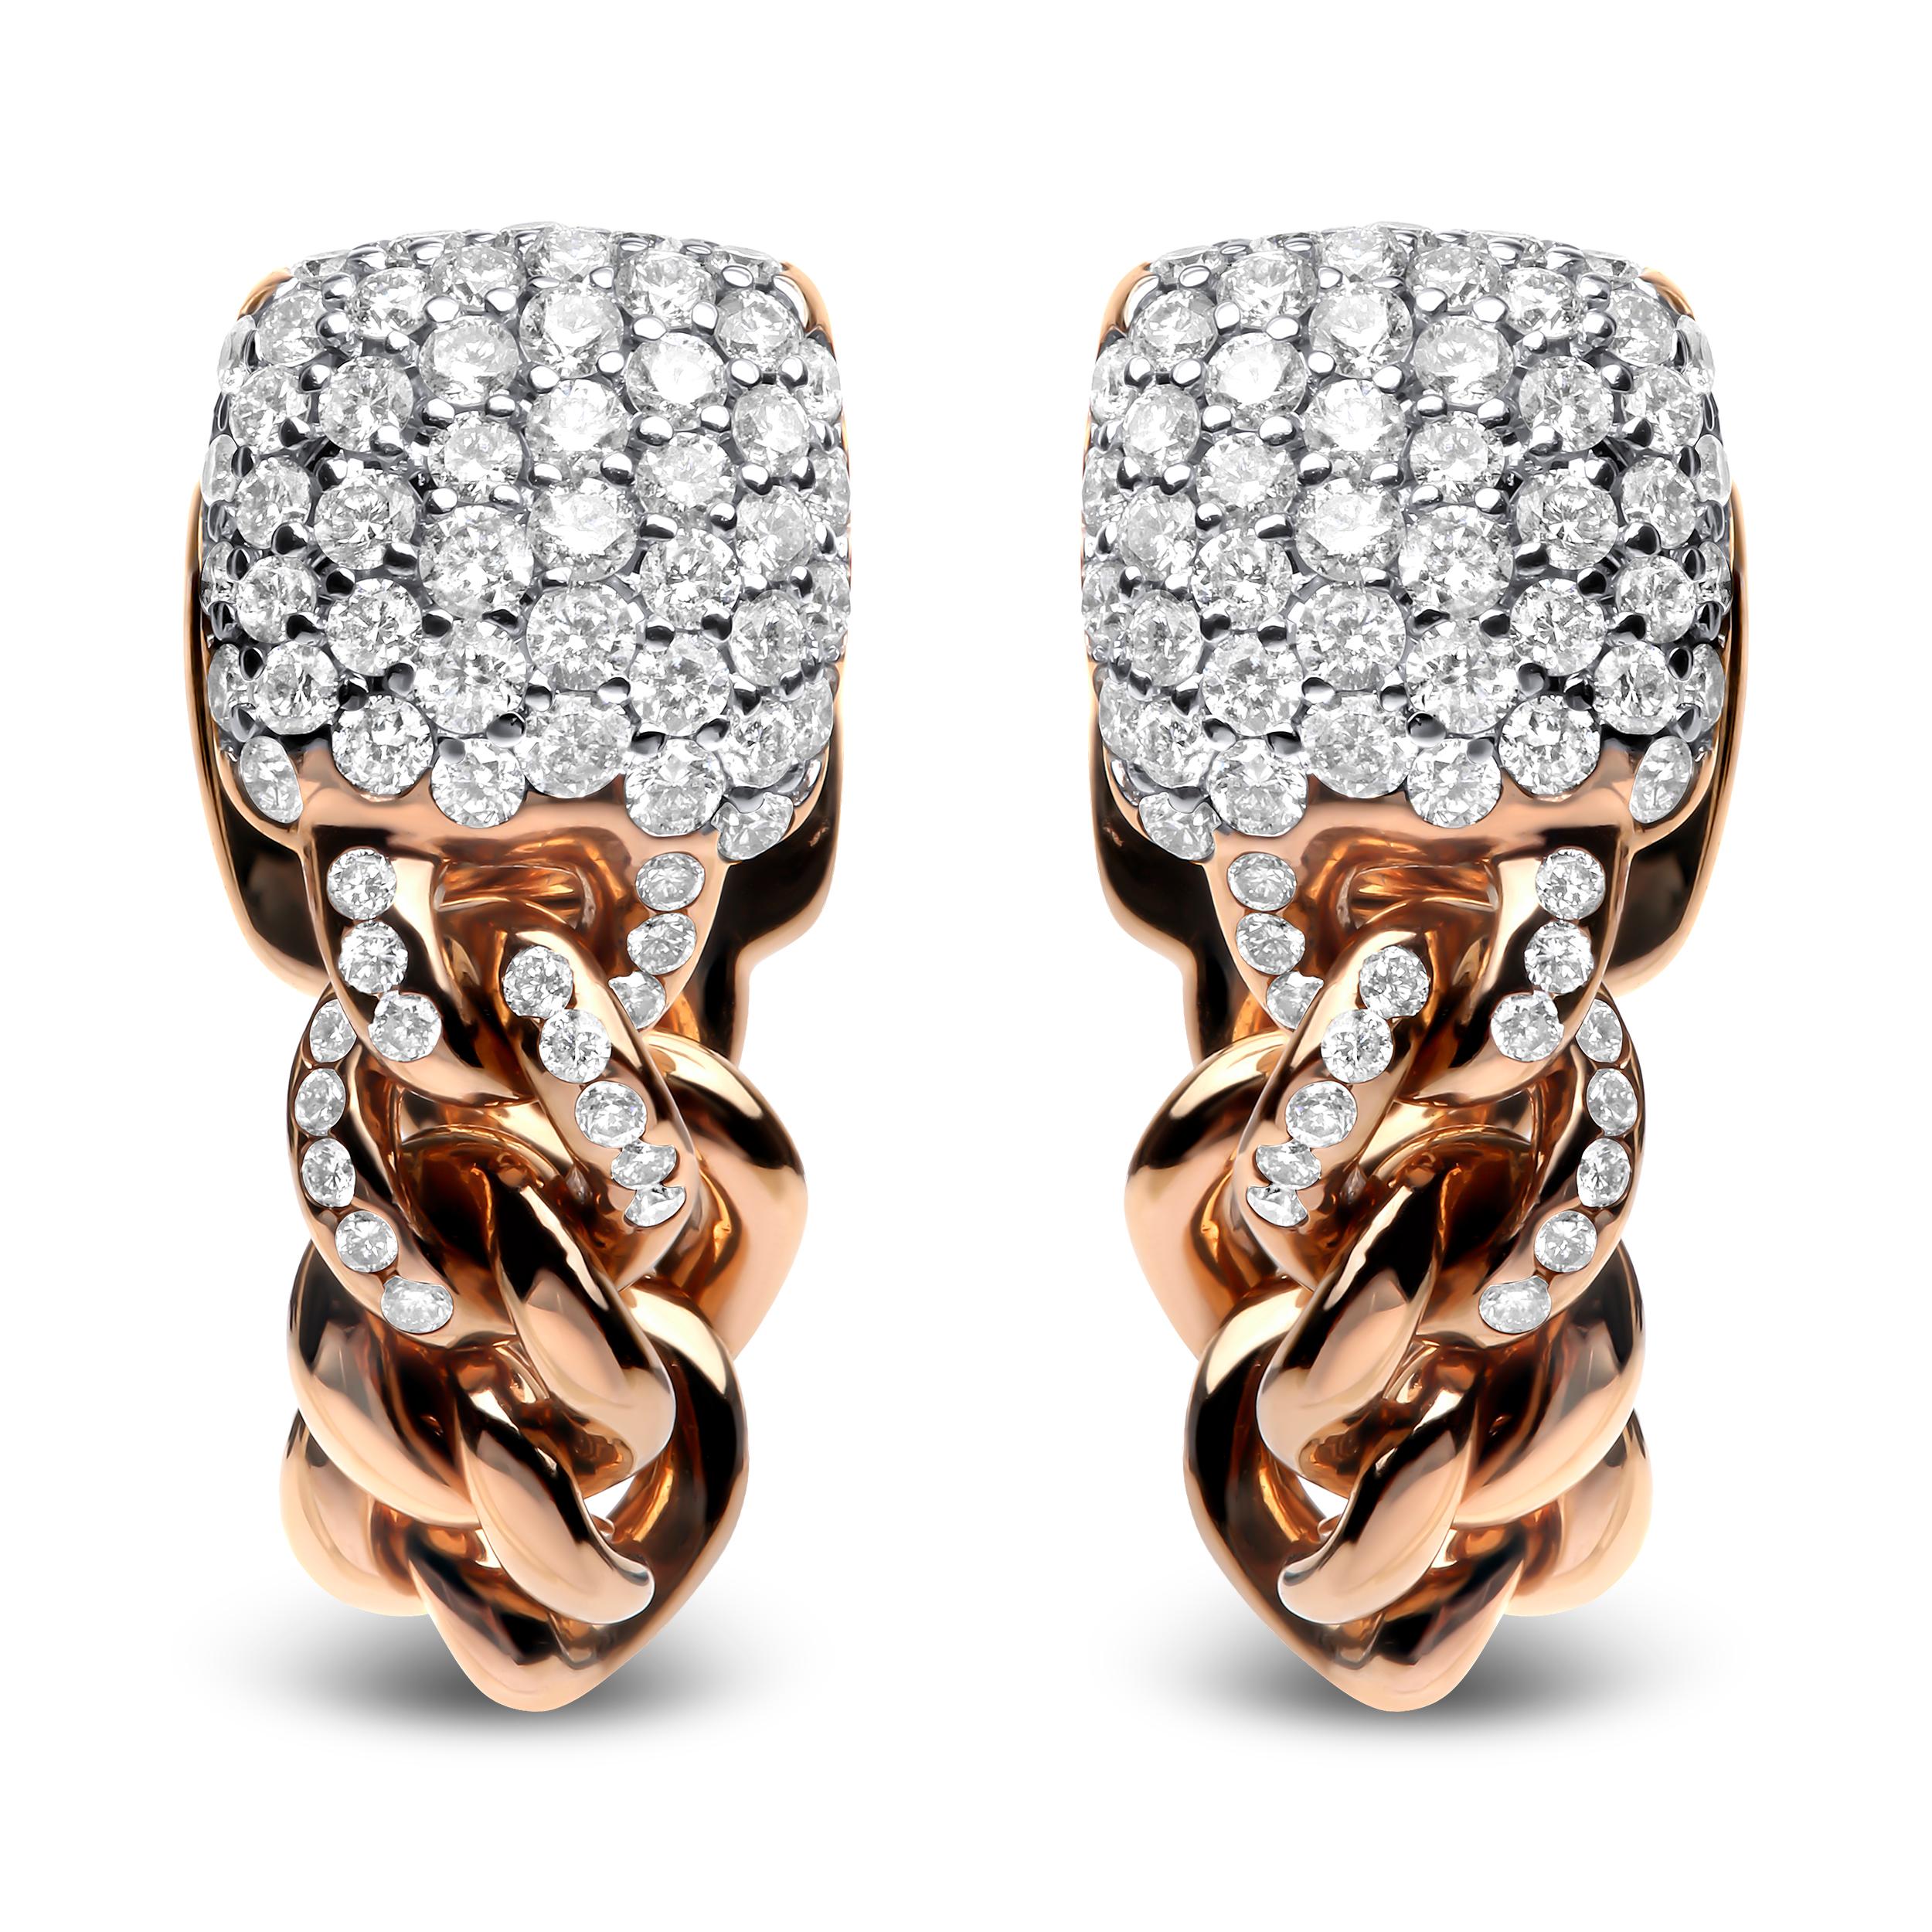 A classic huggie with an edgy twist, these 18k rose gold earrings will put you directly in the spotlight with their unique  design. The pair exudes elegance with 128 total diamonds that cluster in prong-settings in a squared silhouette before